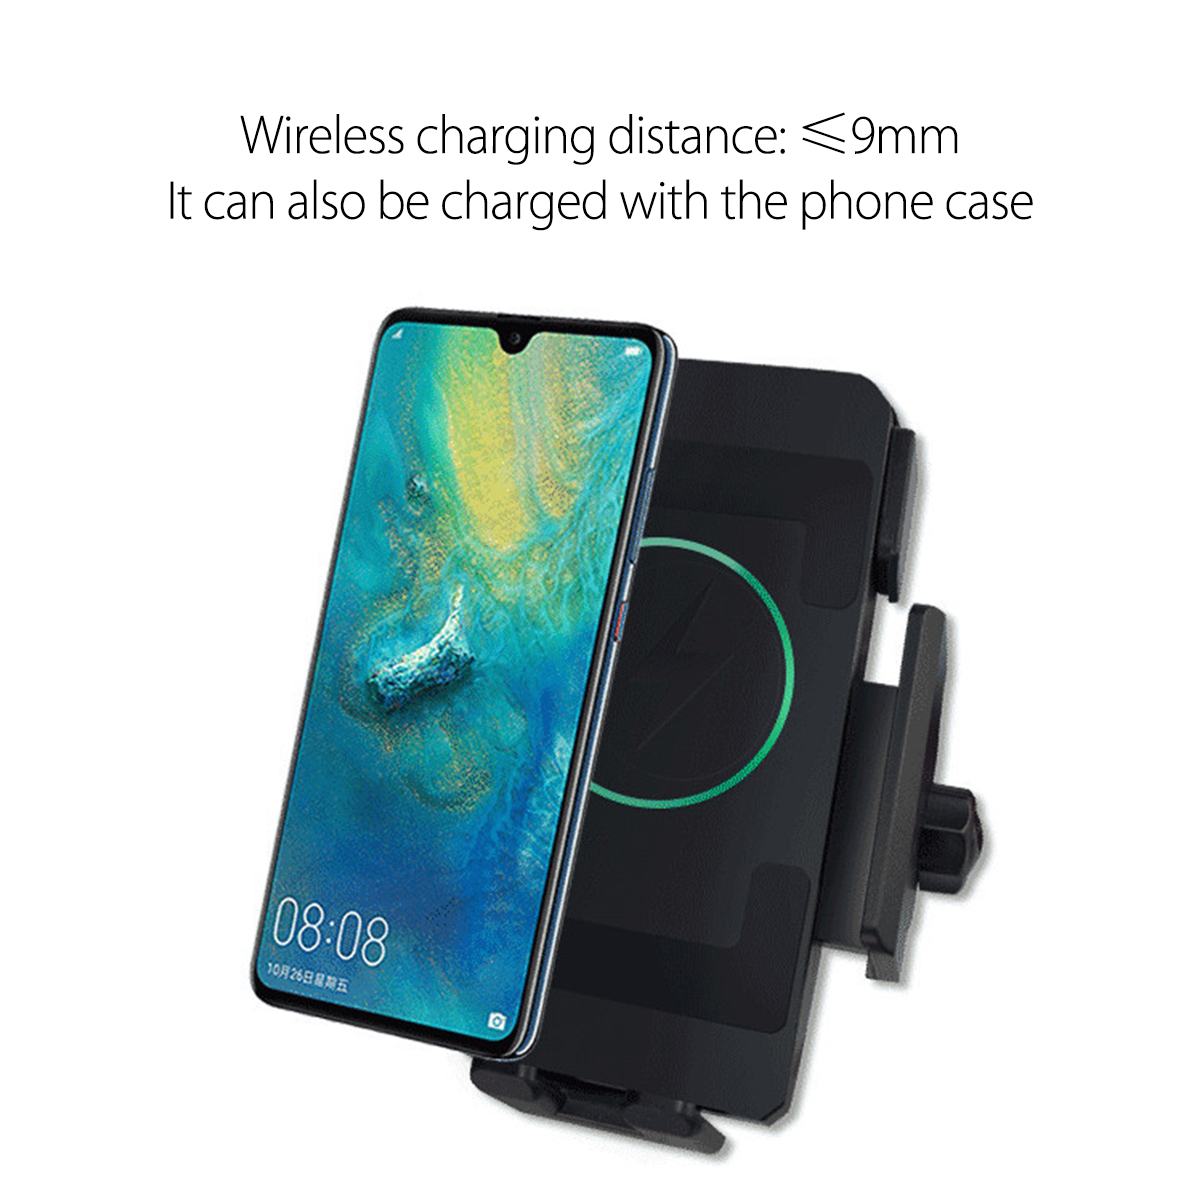 Motorbike 10W Qi Wireless Charger Fast Charging Motorcycle Phone Holder For 4.5 inch-7.1 inch Smart Phone